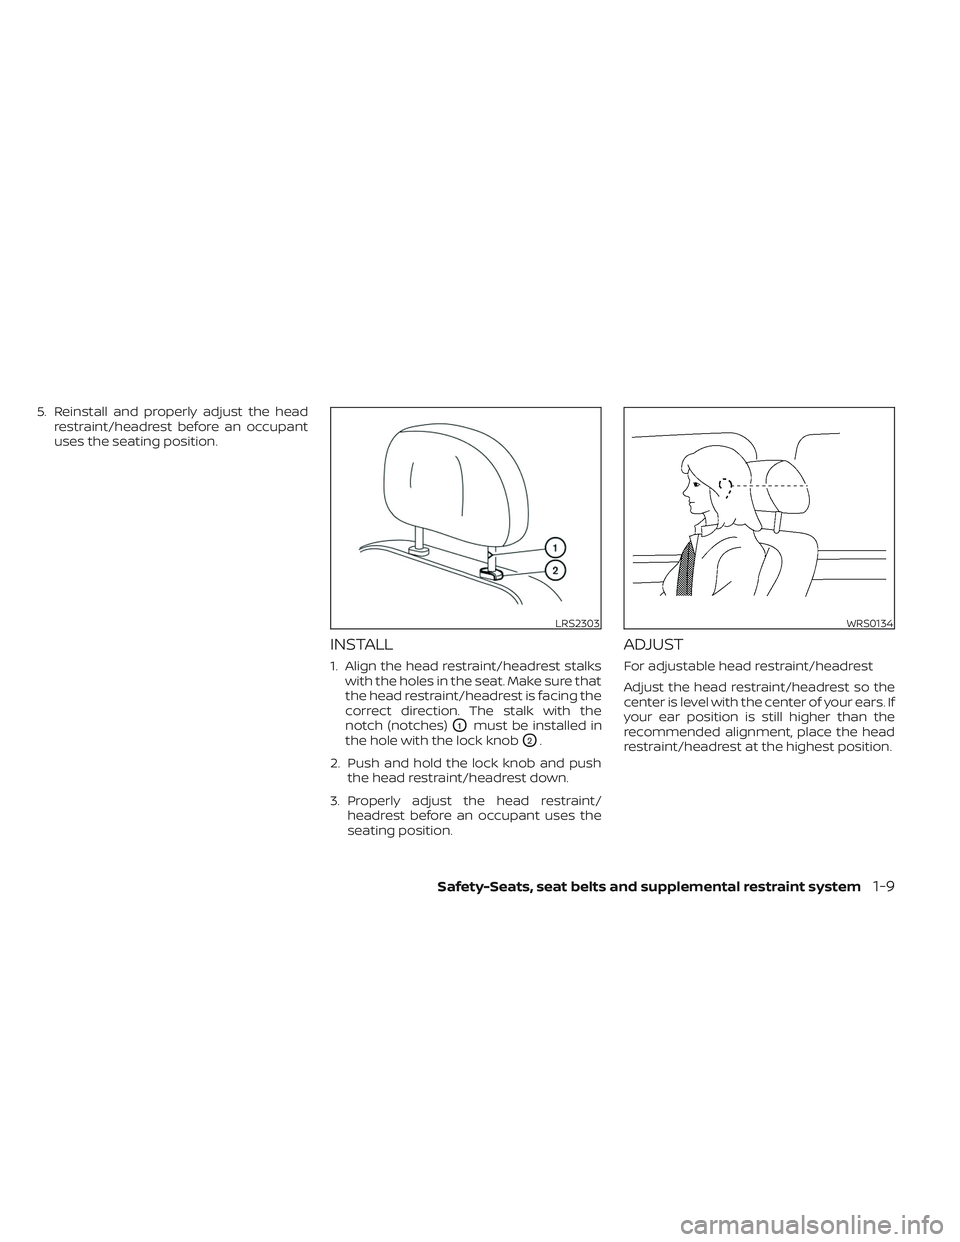 NISSAN MAXIMA 2023 Owners Manual 5. Reinstall and properly adjust the headrestraint/headrest before an occupant
uses the seating position.
INSTALL
1. Align the head restraint/headrest stalkswith the holes in the seat. Make sure that
